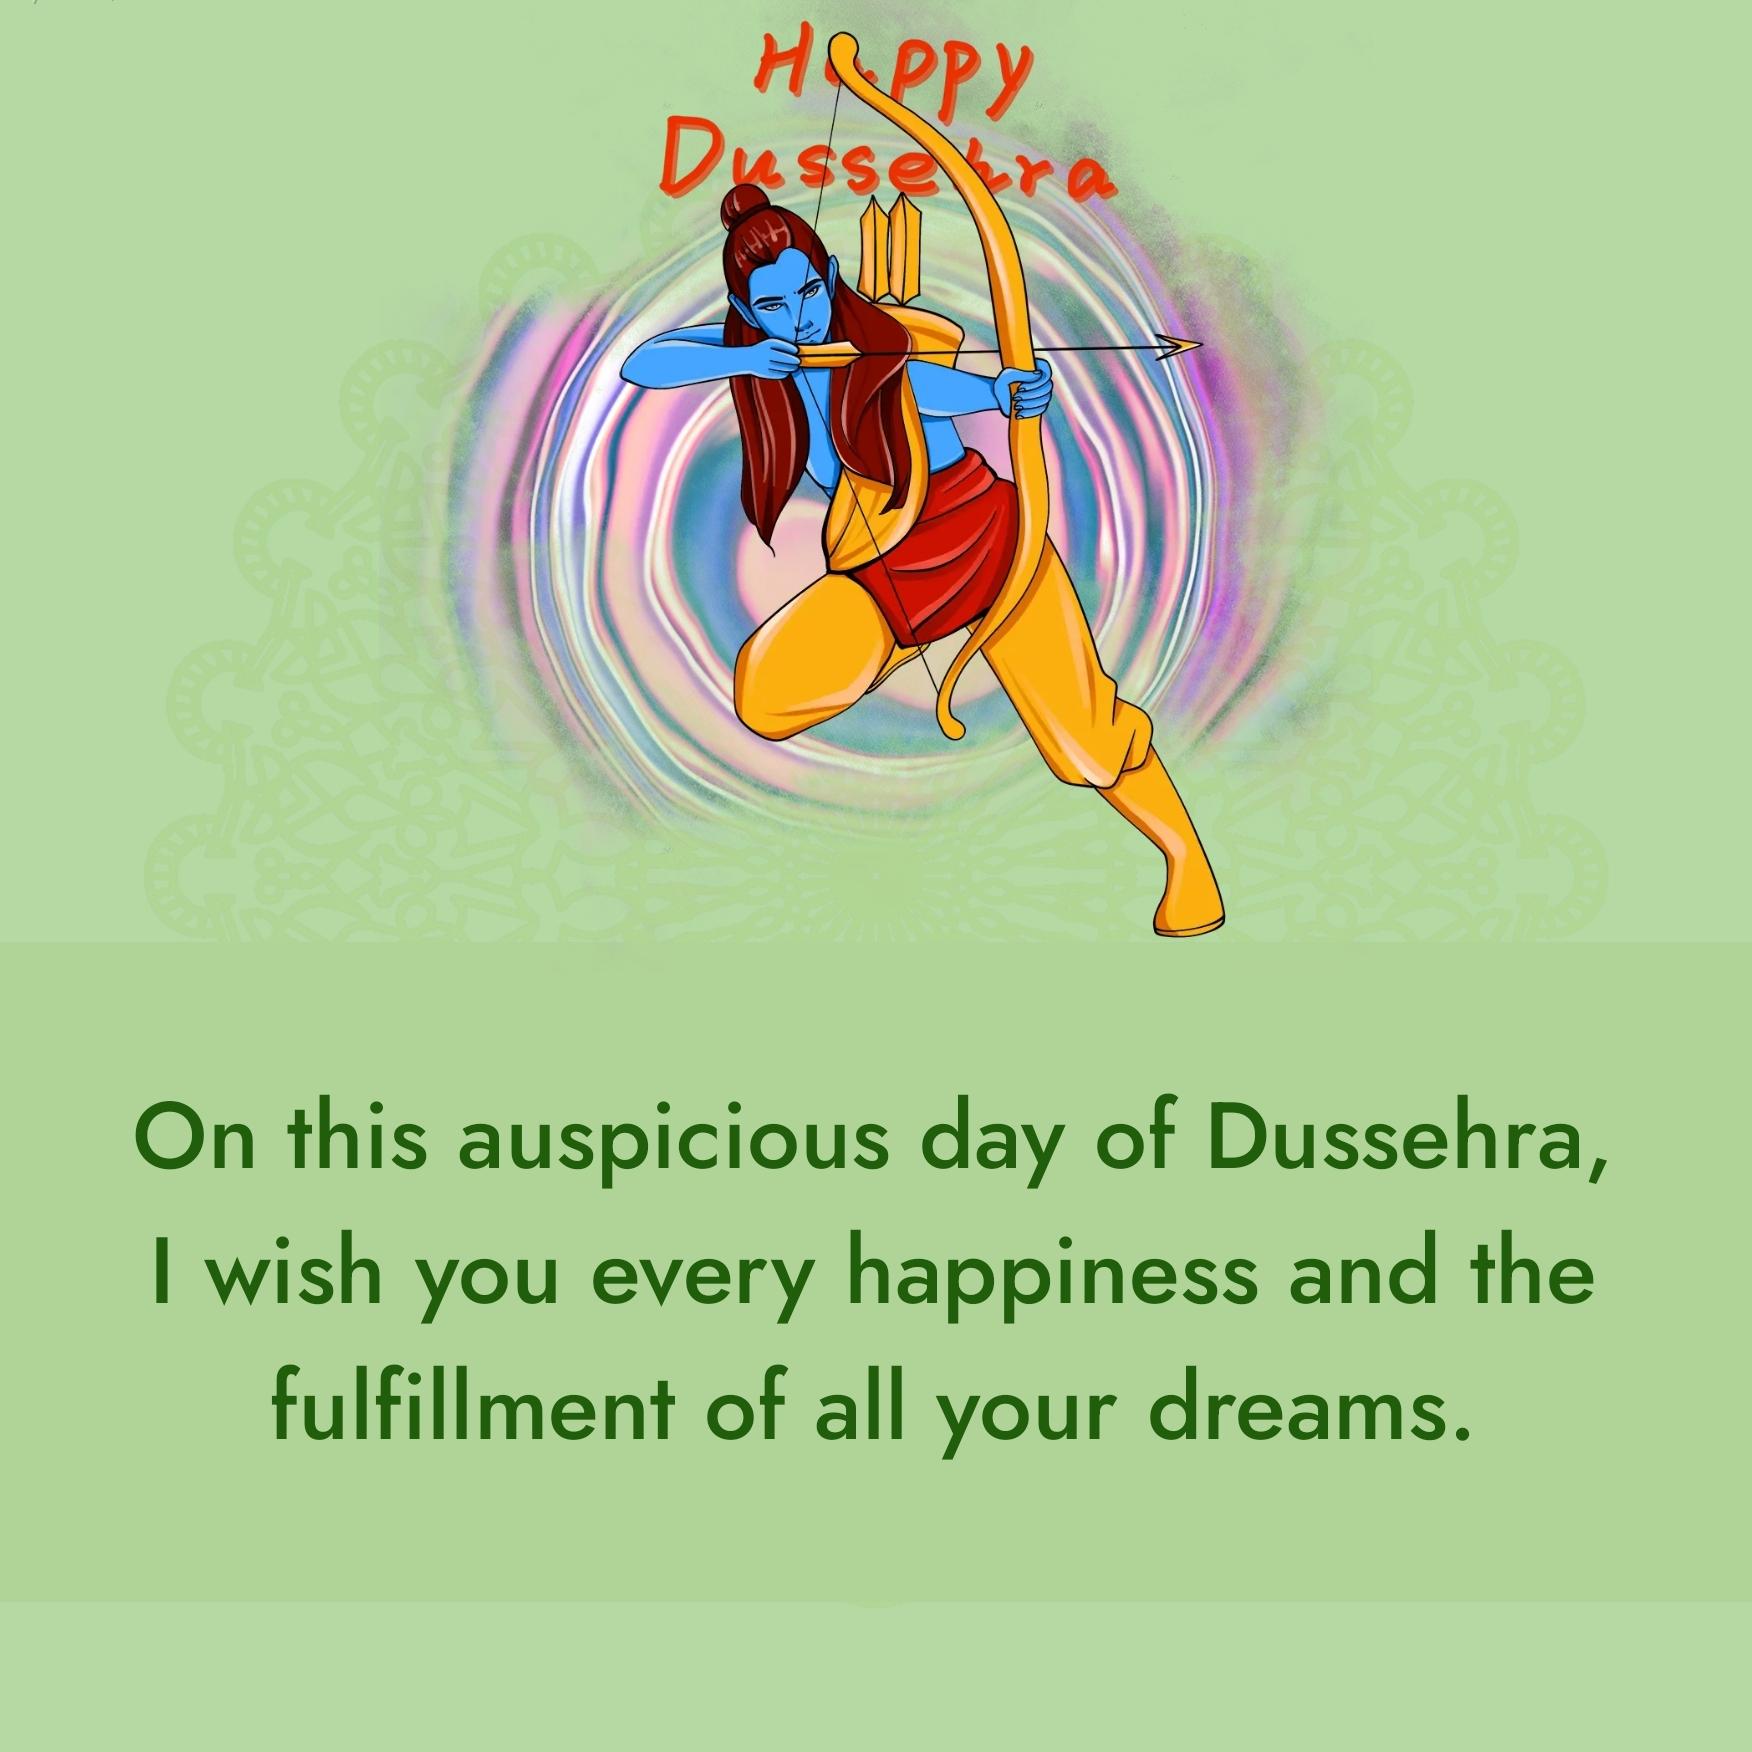 On this auspicious day of Dussehra I wish you every